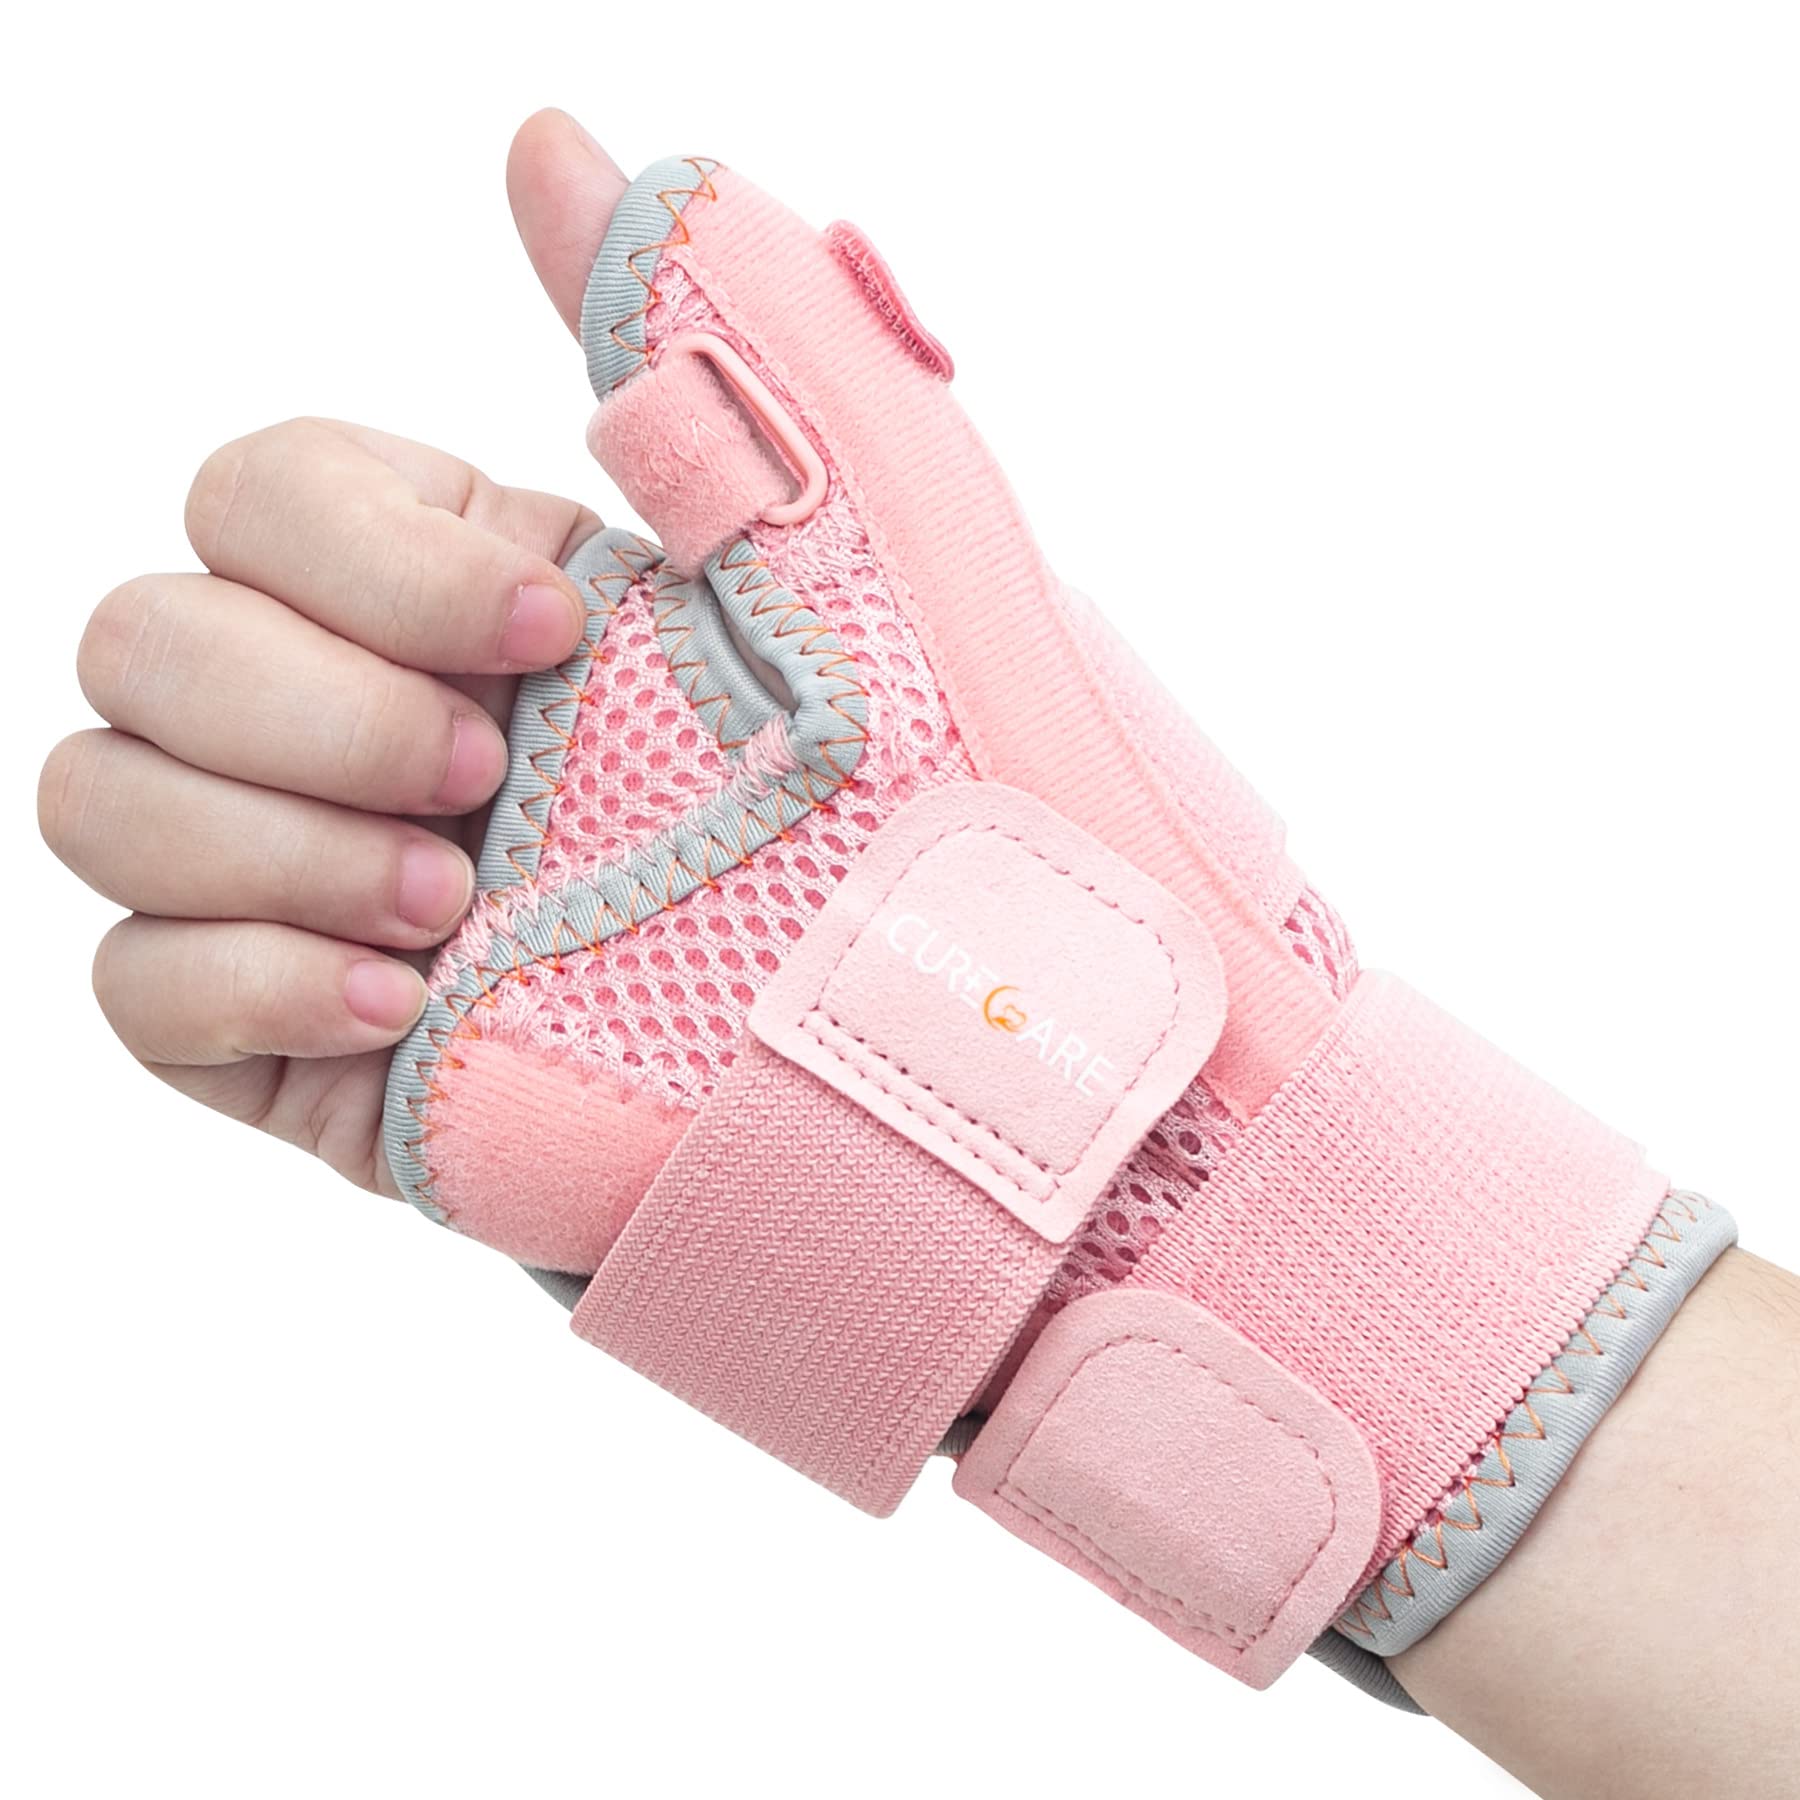 CURECARE New Upgraded Thumb Support for Right & Left Hand, Reversible Thumb Splint for Arthritis Pain And Support, Thumb Brace for Sprains, Tendonitis Relief, One Size Fits Any Hand (Pink)